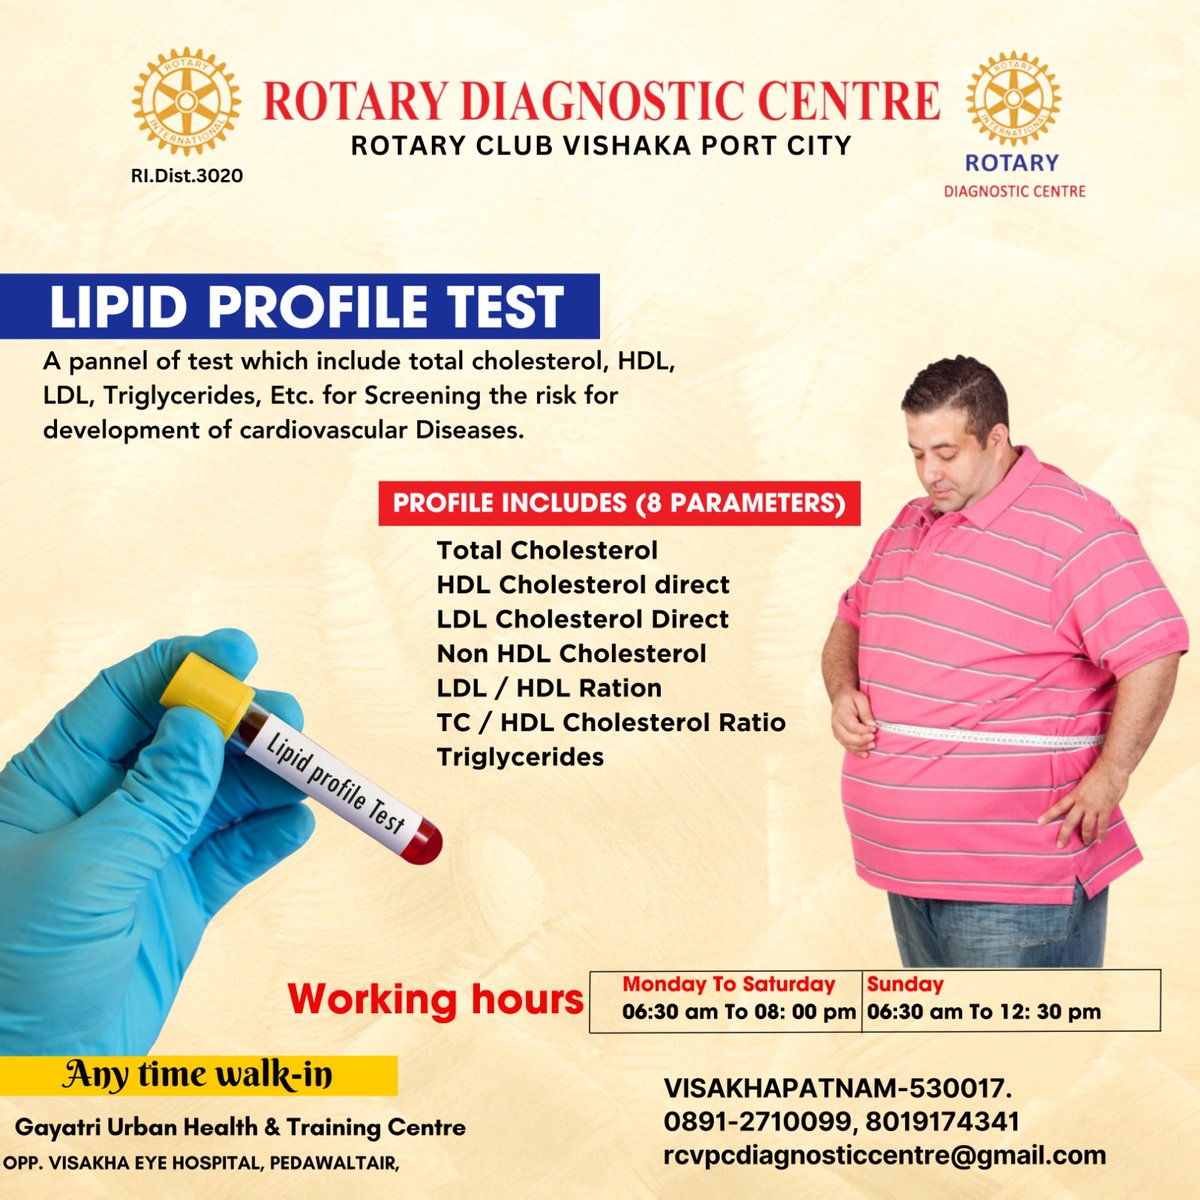 🔬 Take charge of your health with a comprehensive lipid profile test at Rotary Diagnostics! 💪

#HealthCheck #LipidProfileTest #RotaryDiagnostics #DiabeticCare #BloodSugar #Insulin #HealthyLiving #DiabetesAwareness #Type1 #Type2 #GlucoseControl #HealthyChoices #ManageDiabetes